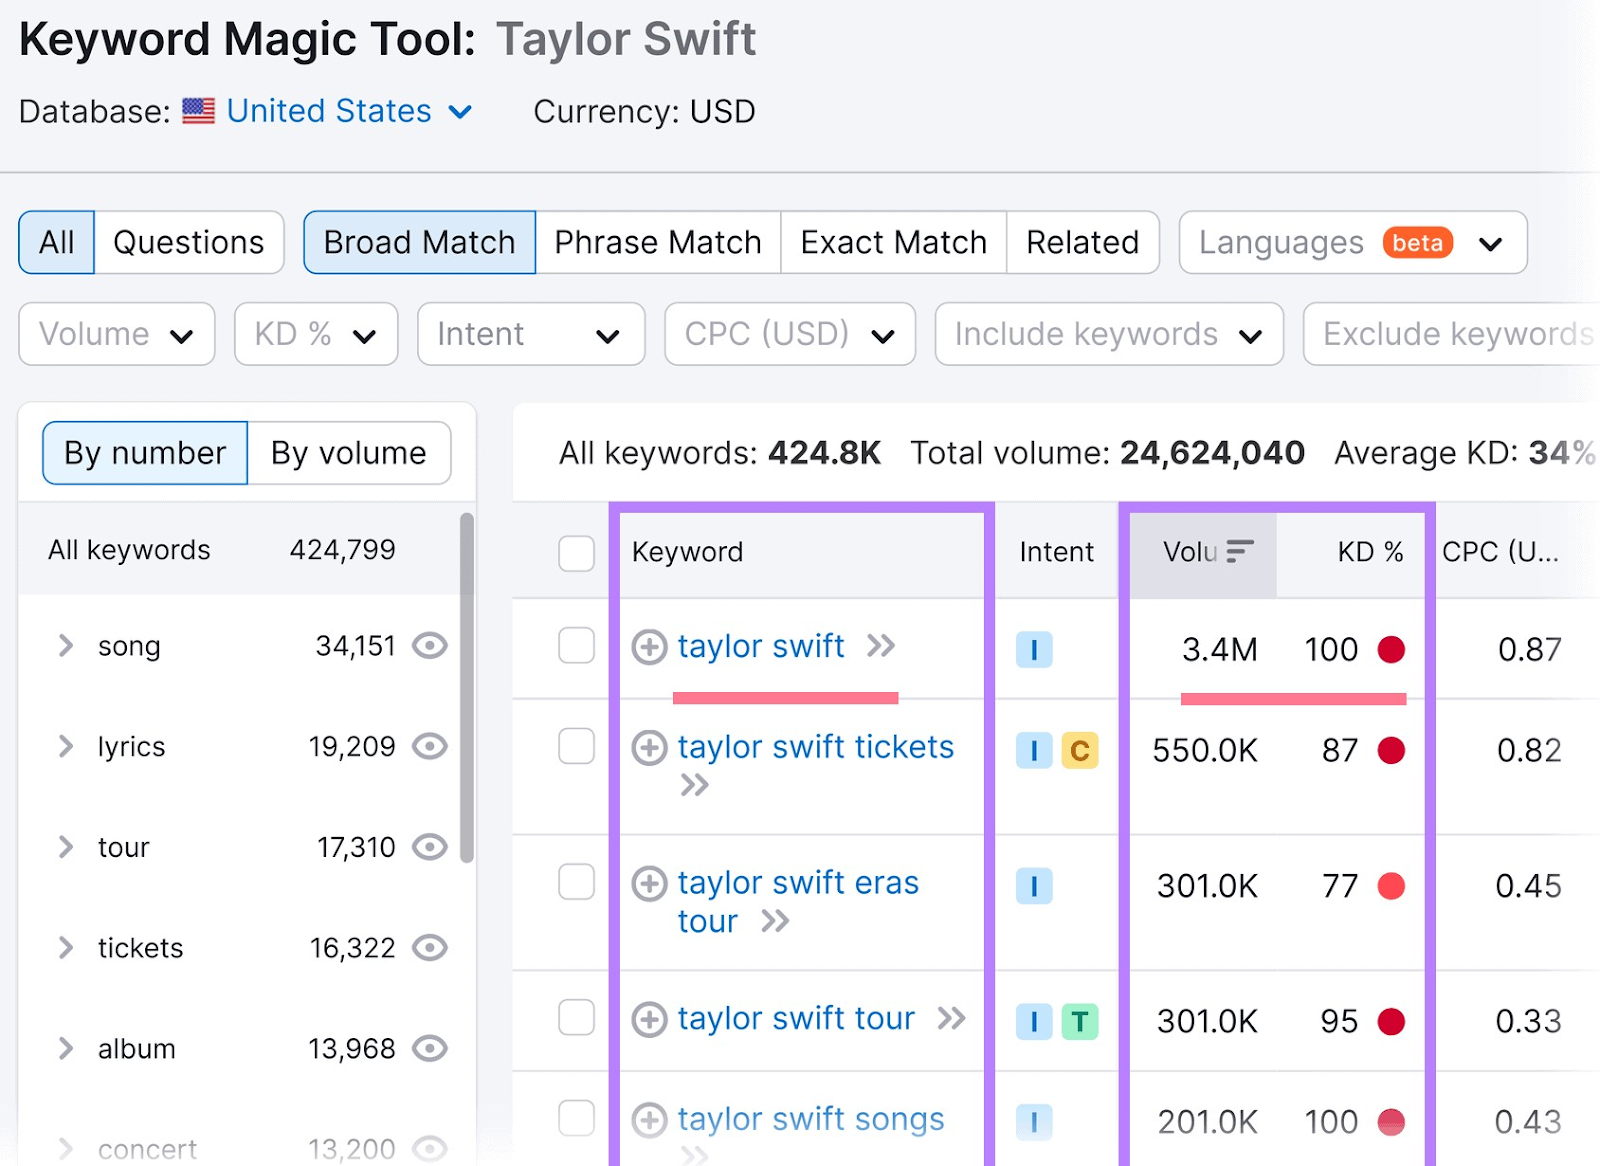 Keyword Magic Tool results for "Taylor Swift" search